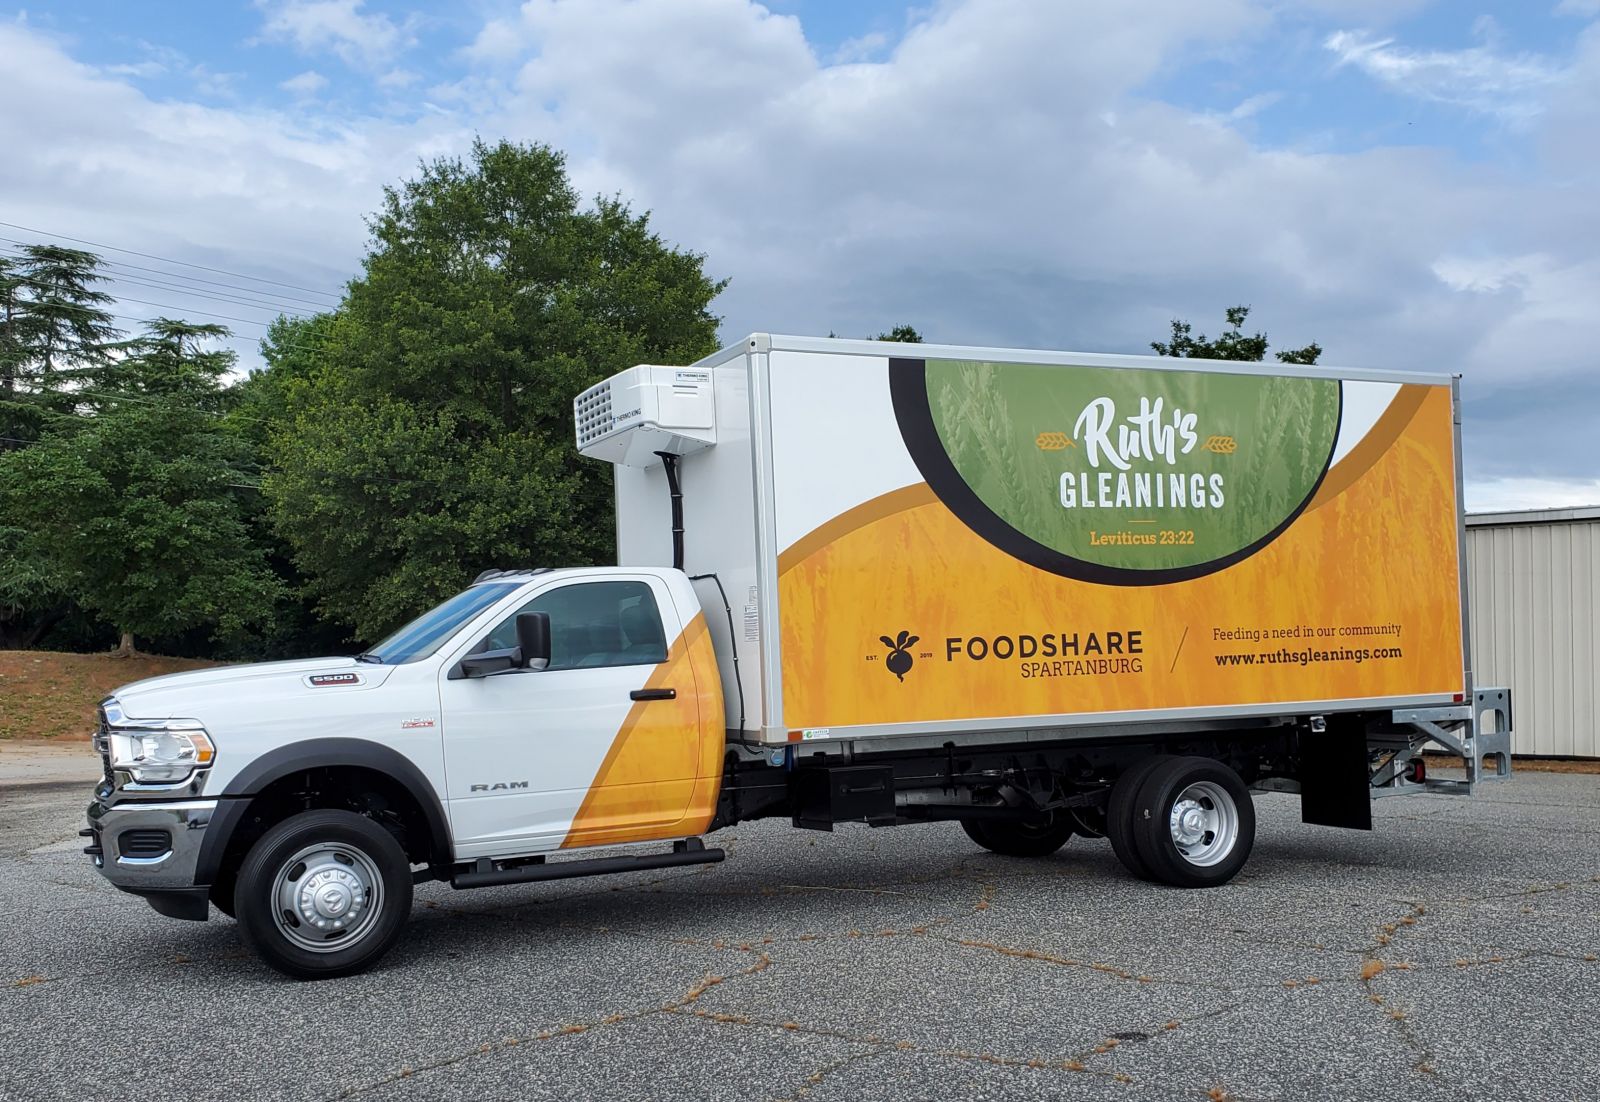 The new truck will help expand Ruth's Gleanings distribution capacity by 500 FoodShare boxes. (Photo/Provided)